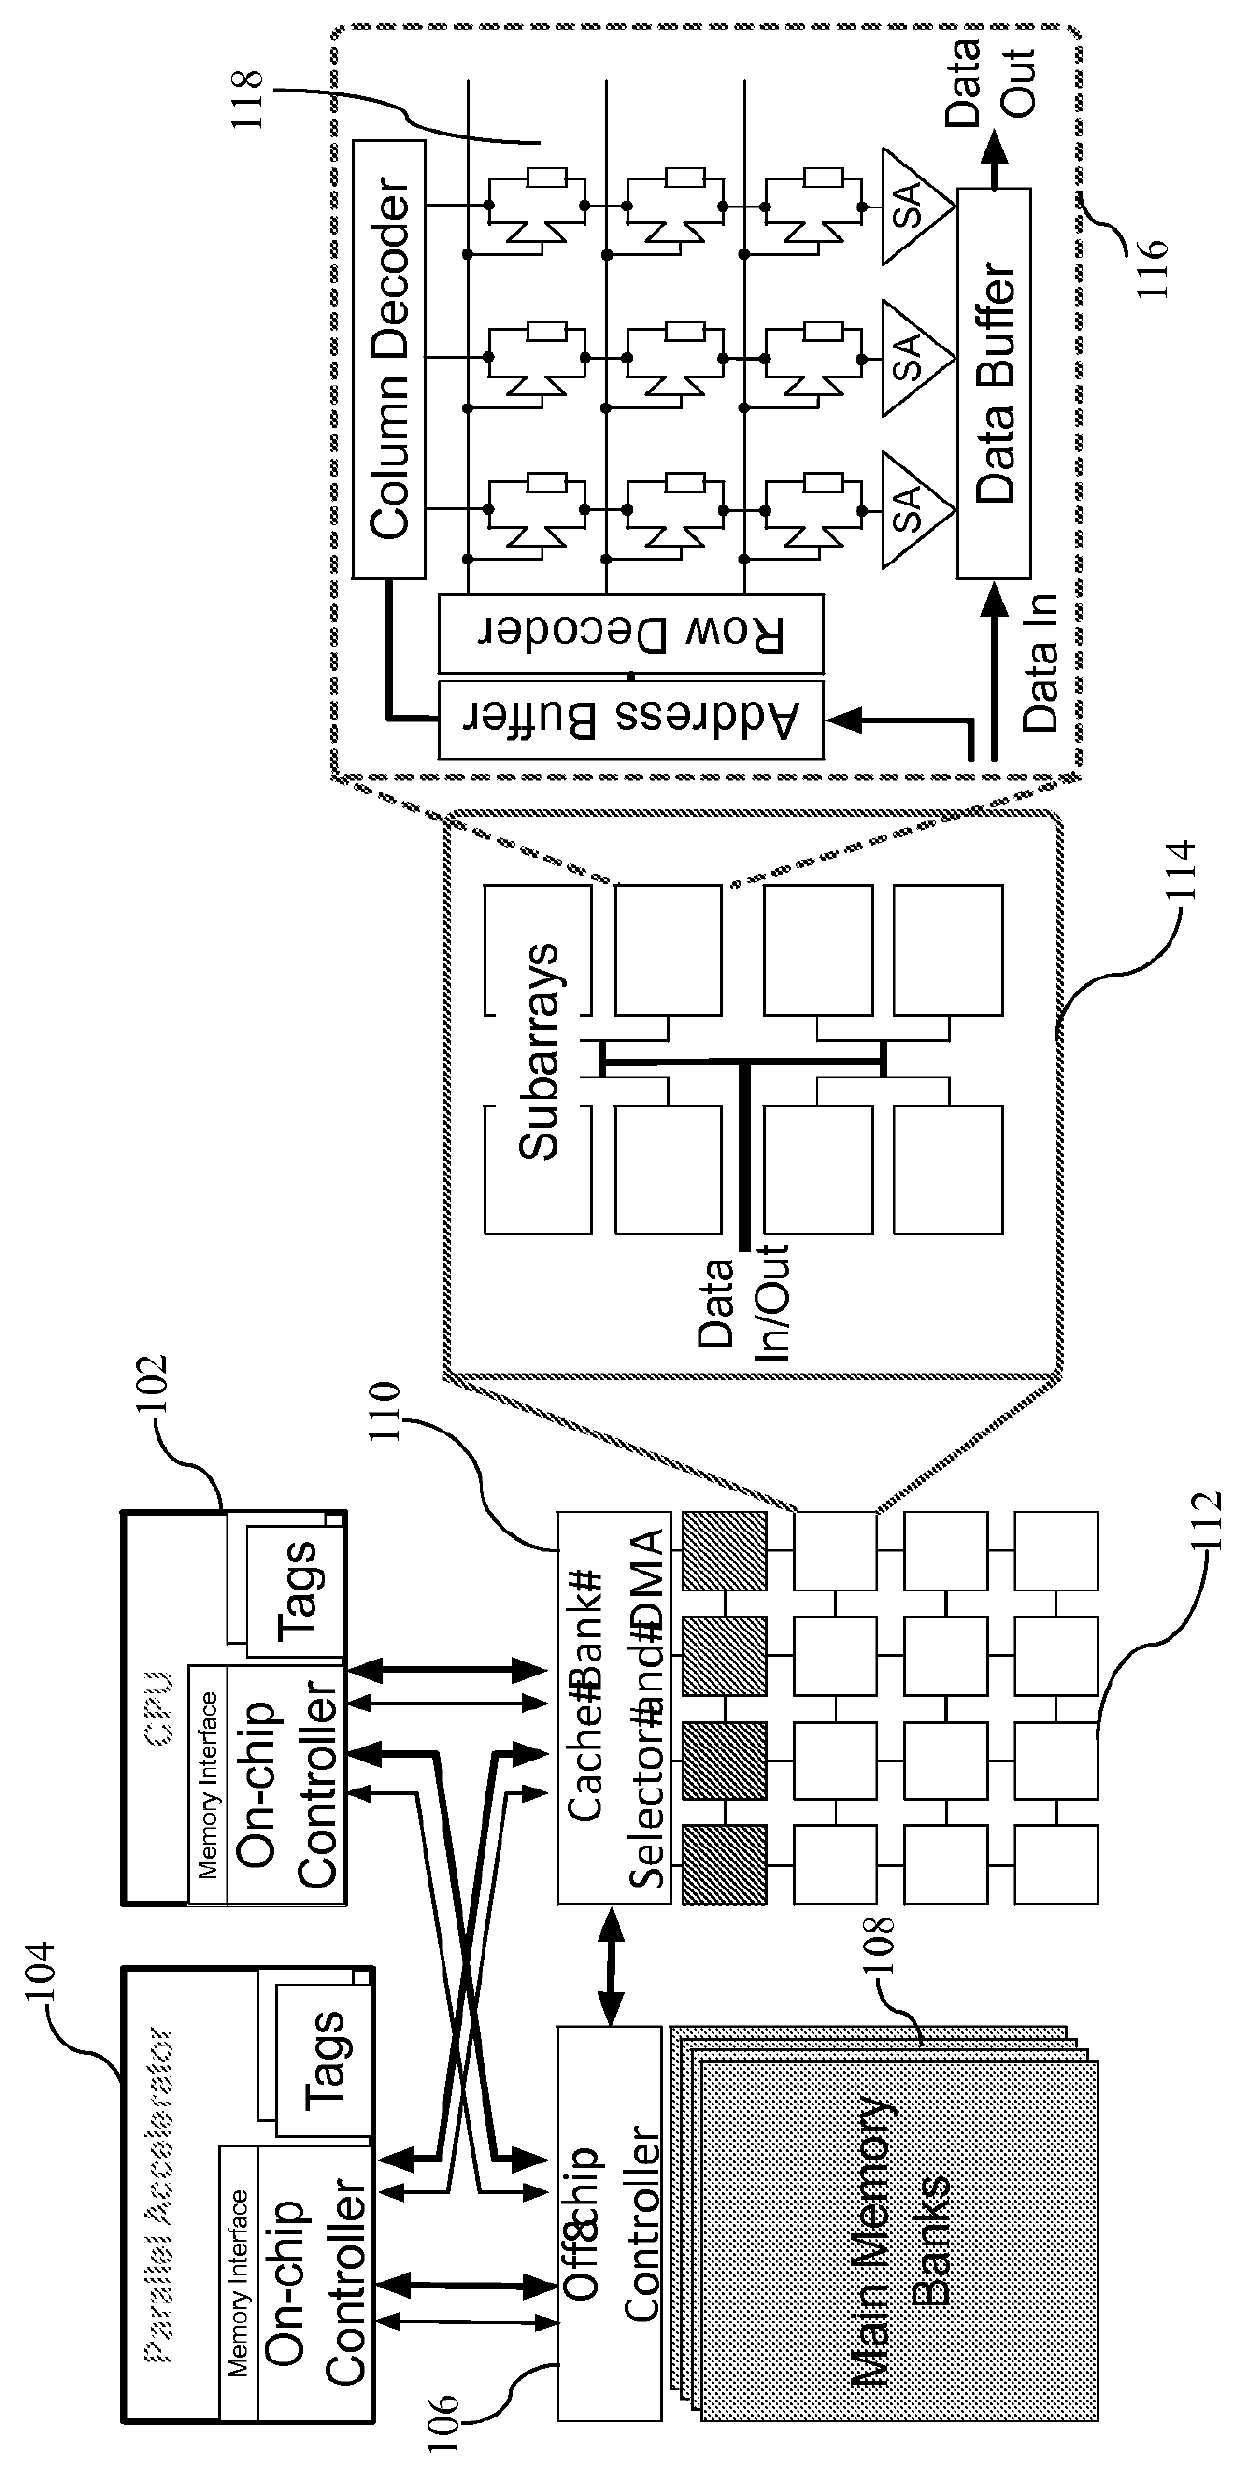 Magnetic ram array architecture